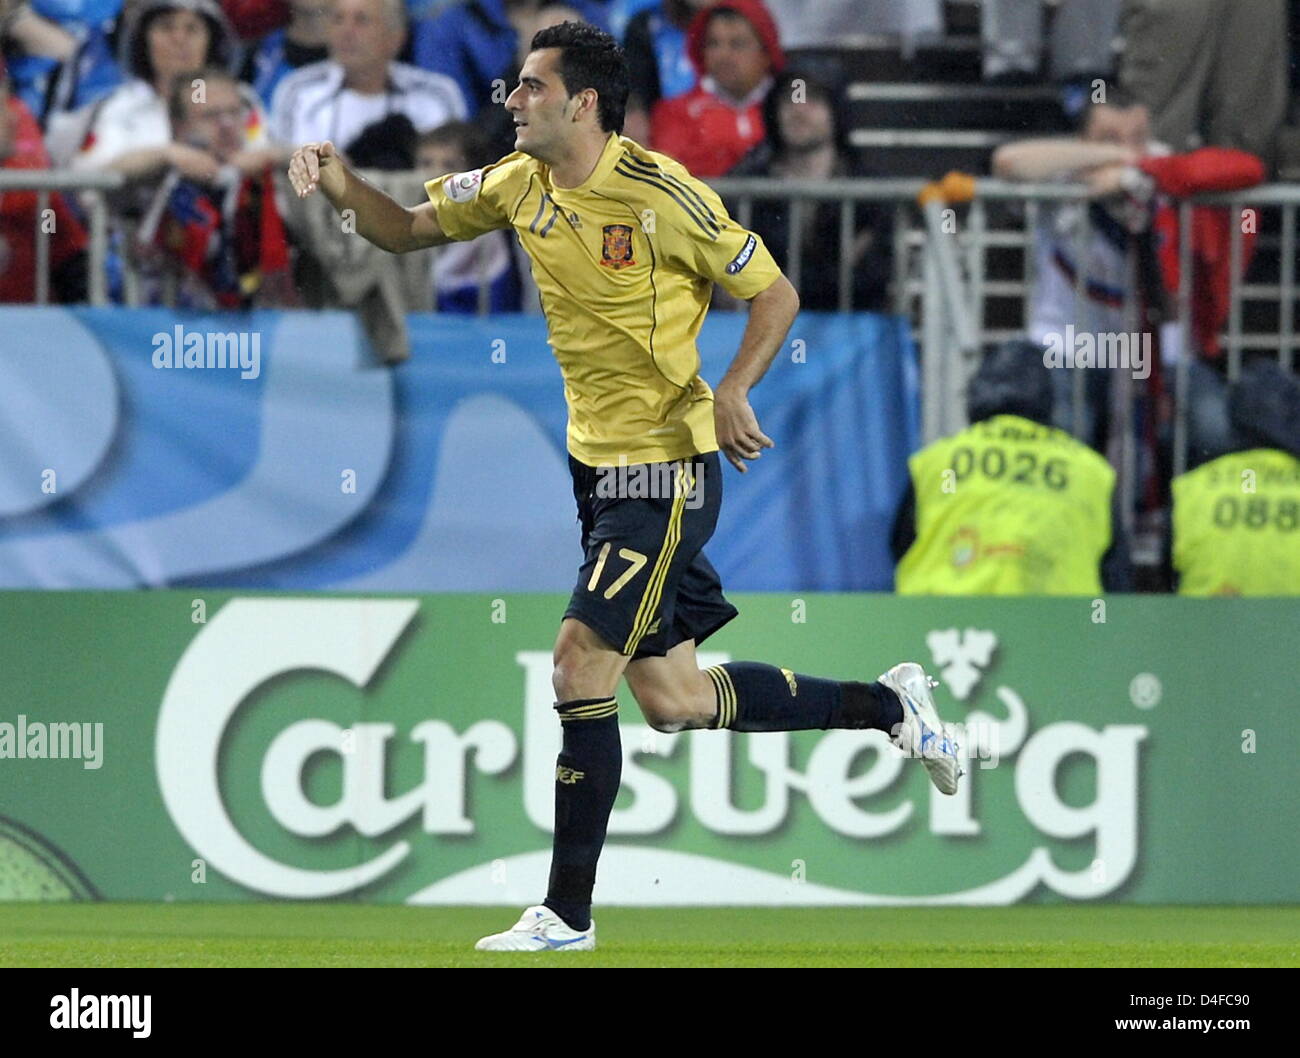 Daniel Guiza of Spain jubilates after his 0-2 goal during the UEFA EURO 2008 semifinal match between Russia and Spain at the Ernst Happel stadium in Vienna, Austria, 26 June 2008. Photo: Achim Scheidemann dpa +please note UEFA restrictions particulary in regard to slide shows and 'No Mobile Services'+ +++(c) dpa - Bildfunk+++ Stock Photo